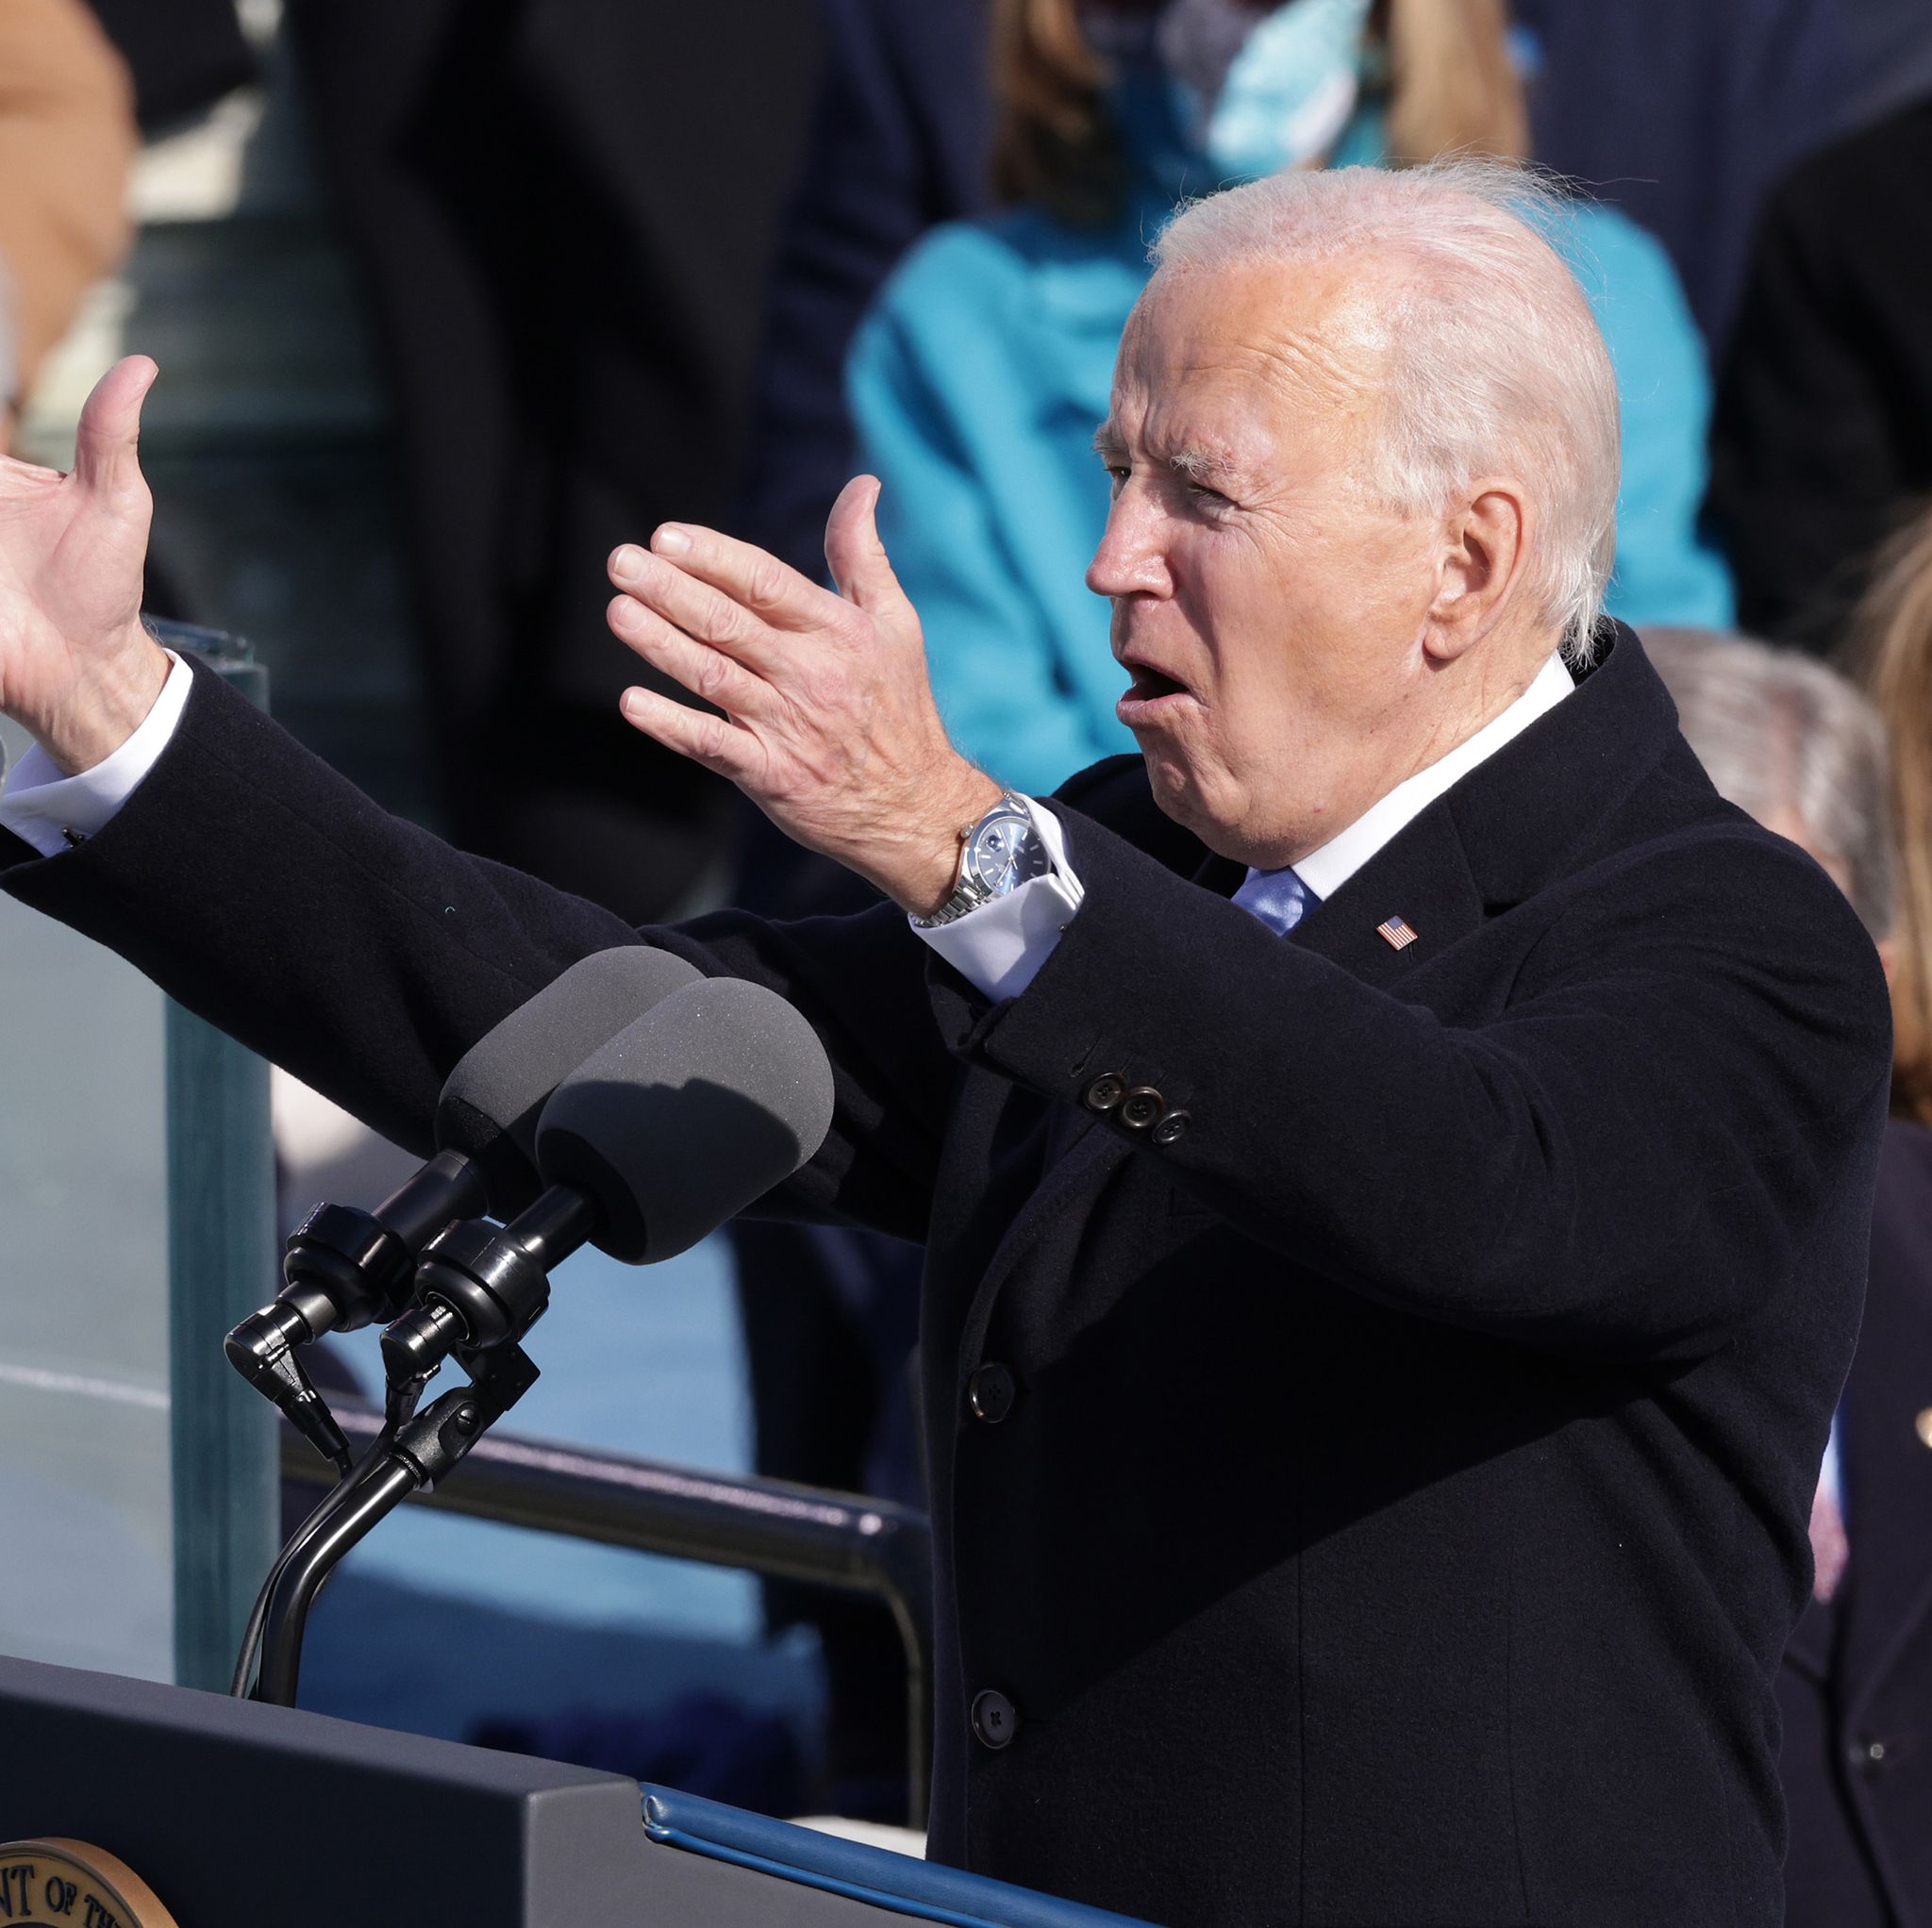 washington, dc   january 20  us president joe biden delivers his inaugural address on the west front of the us capitol on january 20, 2021 in washington, dc  during today's inauguration ceremony joe biden becomes the 46th president of the united states photo by alex wonggetty images